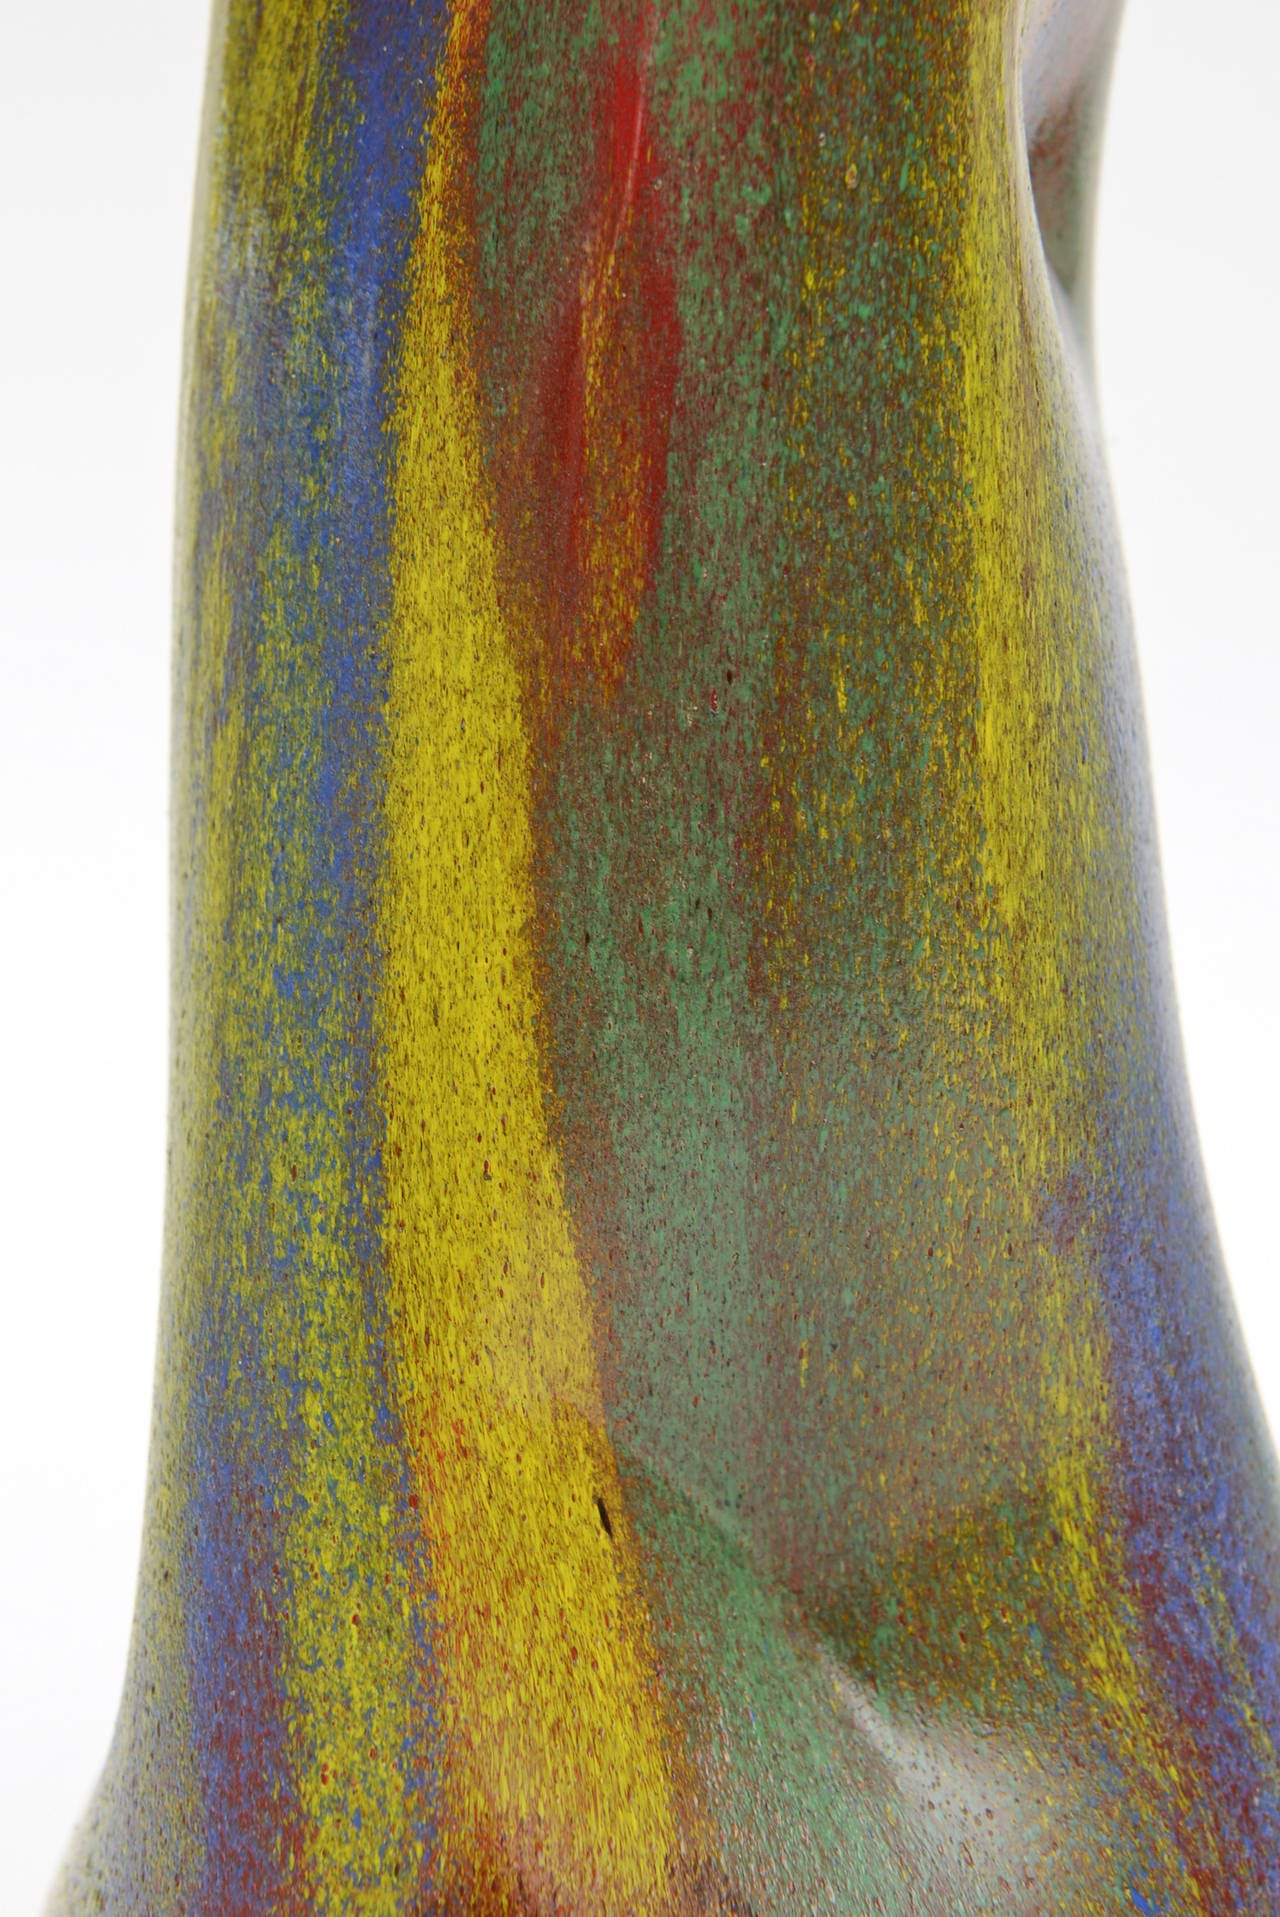 Dino Martens Murano Red Blue Cinched Glass Vase or Vessel, Mid-Century Modern In Good Condition For Sale In North Miami, FL